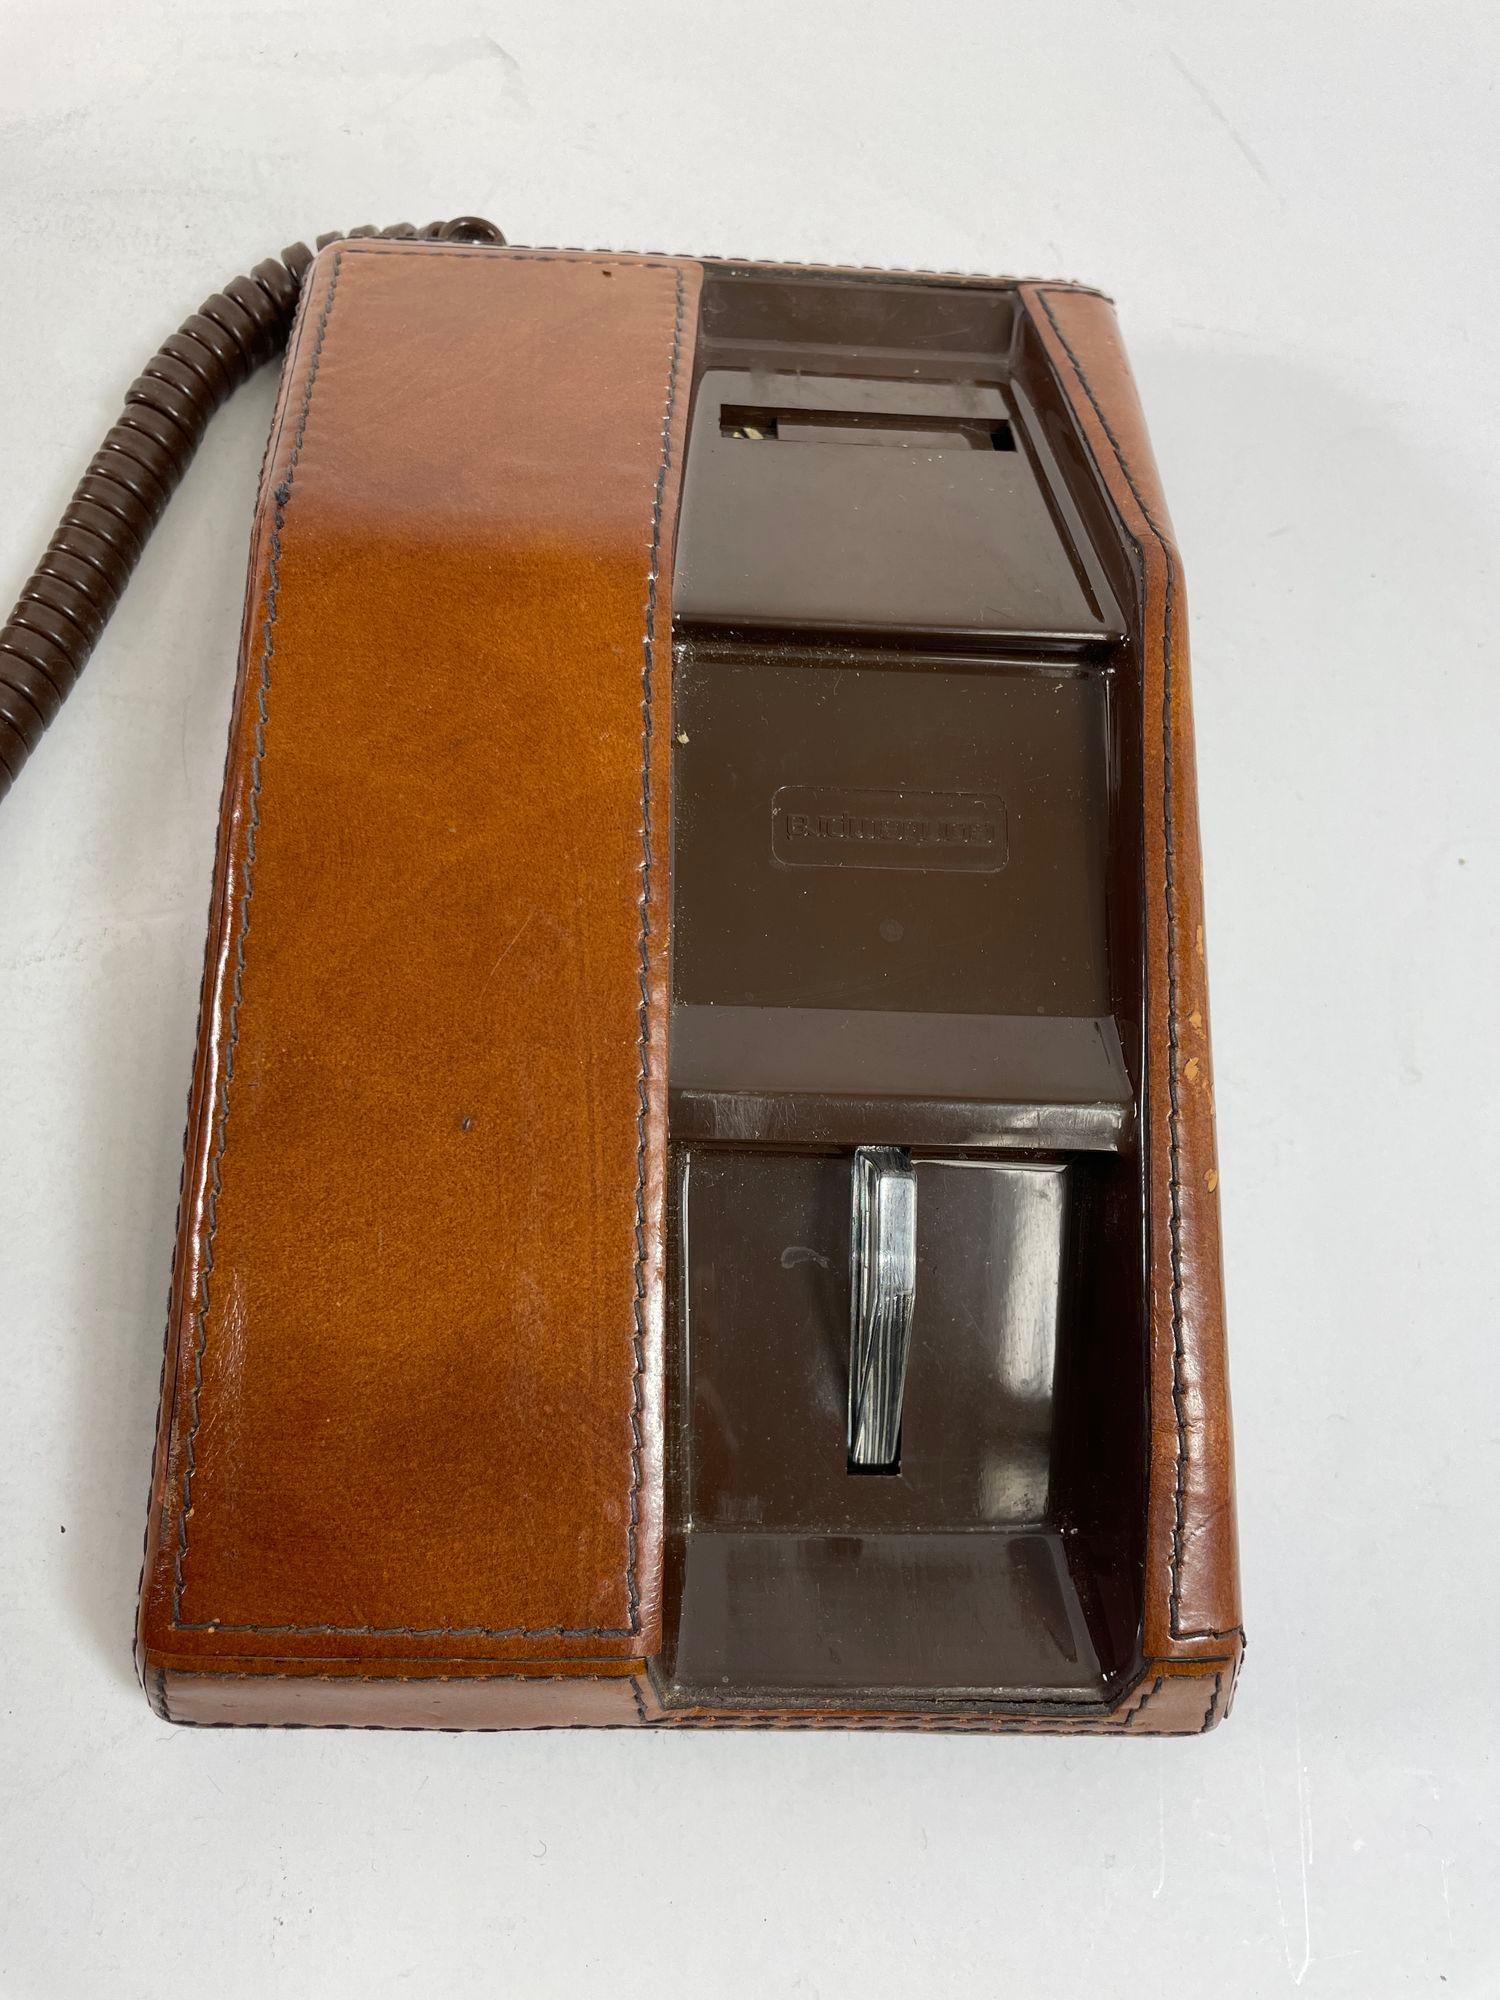 Vintage Brown Leather Covered and Hand-Stitched Telephone by Contempra, 1970s For Sale 1